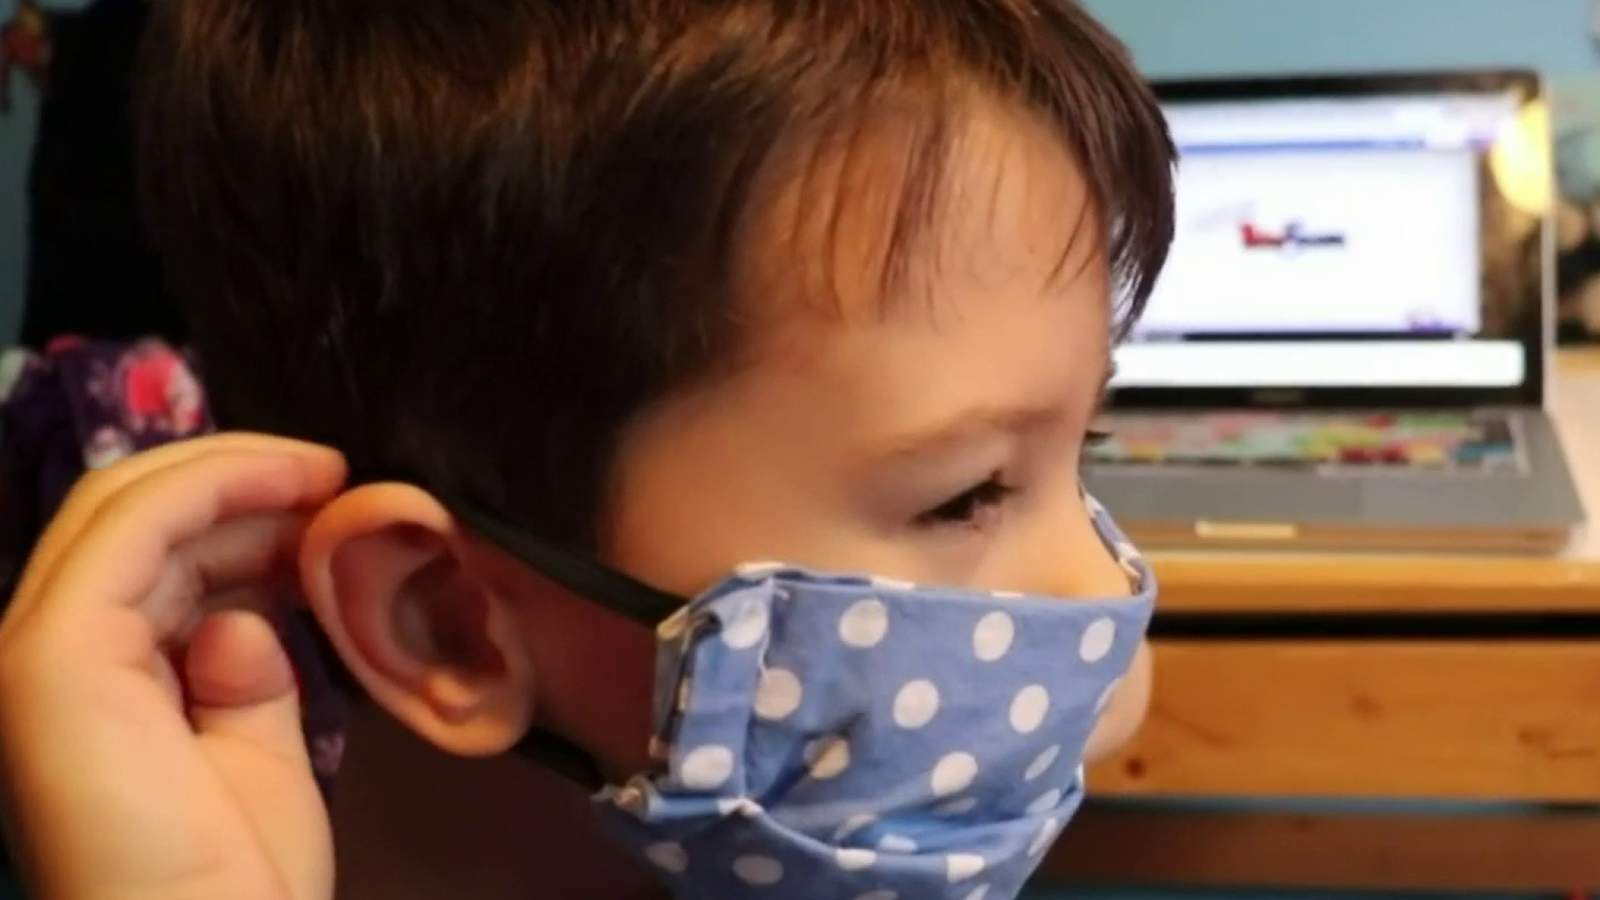 Michigan extends COVID mask mandate to children as young as 2